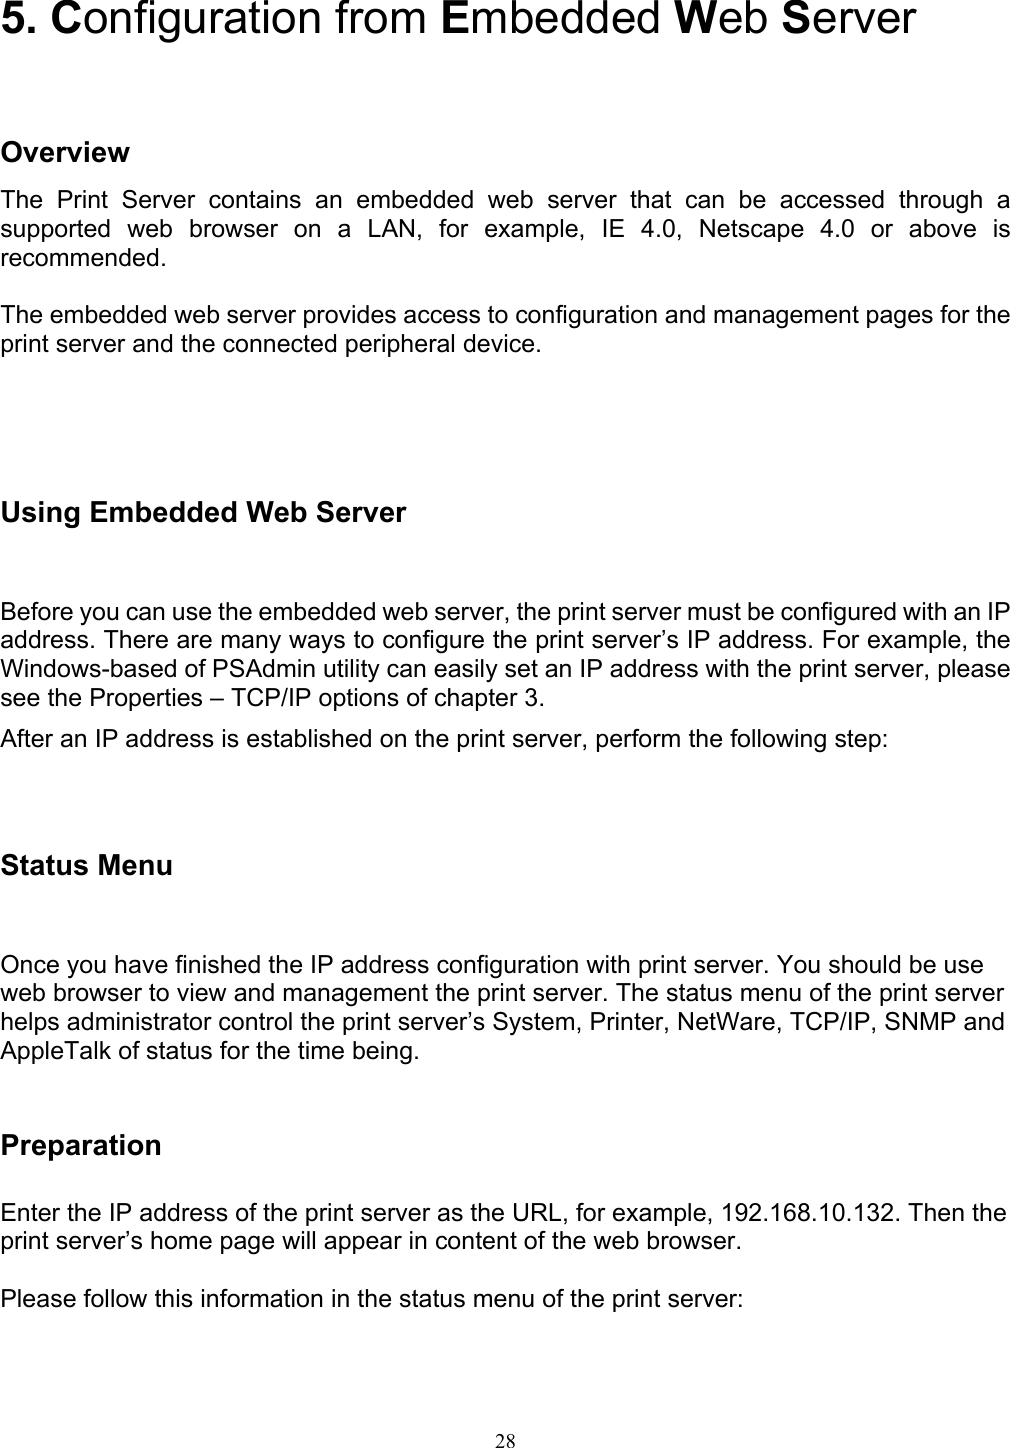   28  5. Configuration from Embedded Web Server    Overview The Print Server contains an embedded web server that can be accessed through a supported web browser on a LAN, for example, IE 4.0, Netscape 4.0 or above is recommended.  The embedded web server provides access to configuration and management pages for the print server and the connected peripheral device.   Using Embedded Web Server Before you can use the embedded web server, the print server must be configured with an IP address. There are many ways to configure the print server’s IP address. For example, the Windows-based of PSAdmin utility can easily set an IP address with the print server, please see the Properties – TCP/IP options of chapter 3. After an IP address is established on the print server, perform the following step:    Status Menu Once you have finished the IP address configuration with print server. You should be use web browser to view and management the print server. The status menu of the print server helps administrator control the print server’s System, Printer, NetWare, TCP/IP, SNMP and AppleTalk of status for the time being.   Preparation  Enter the IP address of the print server as the URL, for example, 192.168.10.132. Then the print server’s home page will appear in content of the web browser.  Please follow this information in the status menu of the print server:  